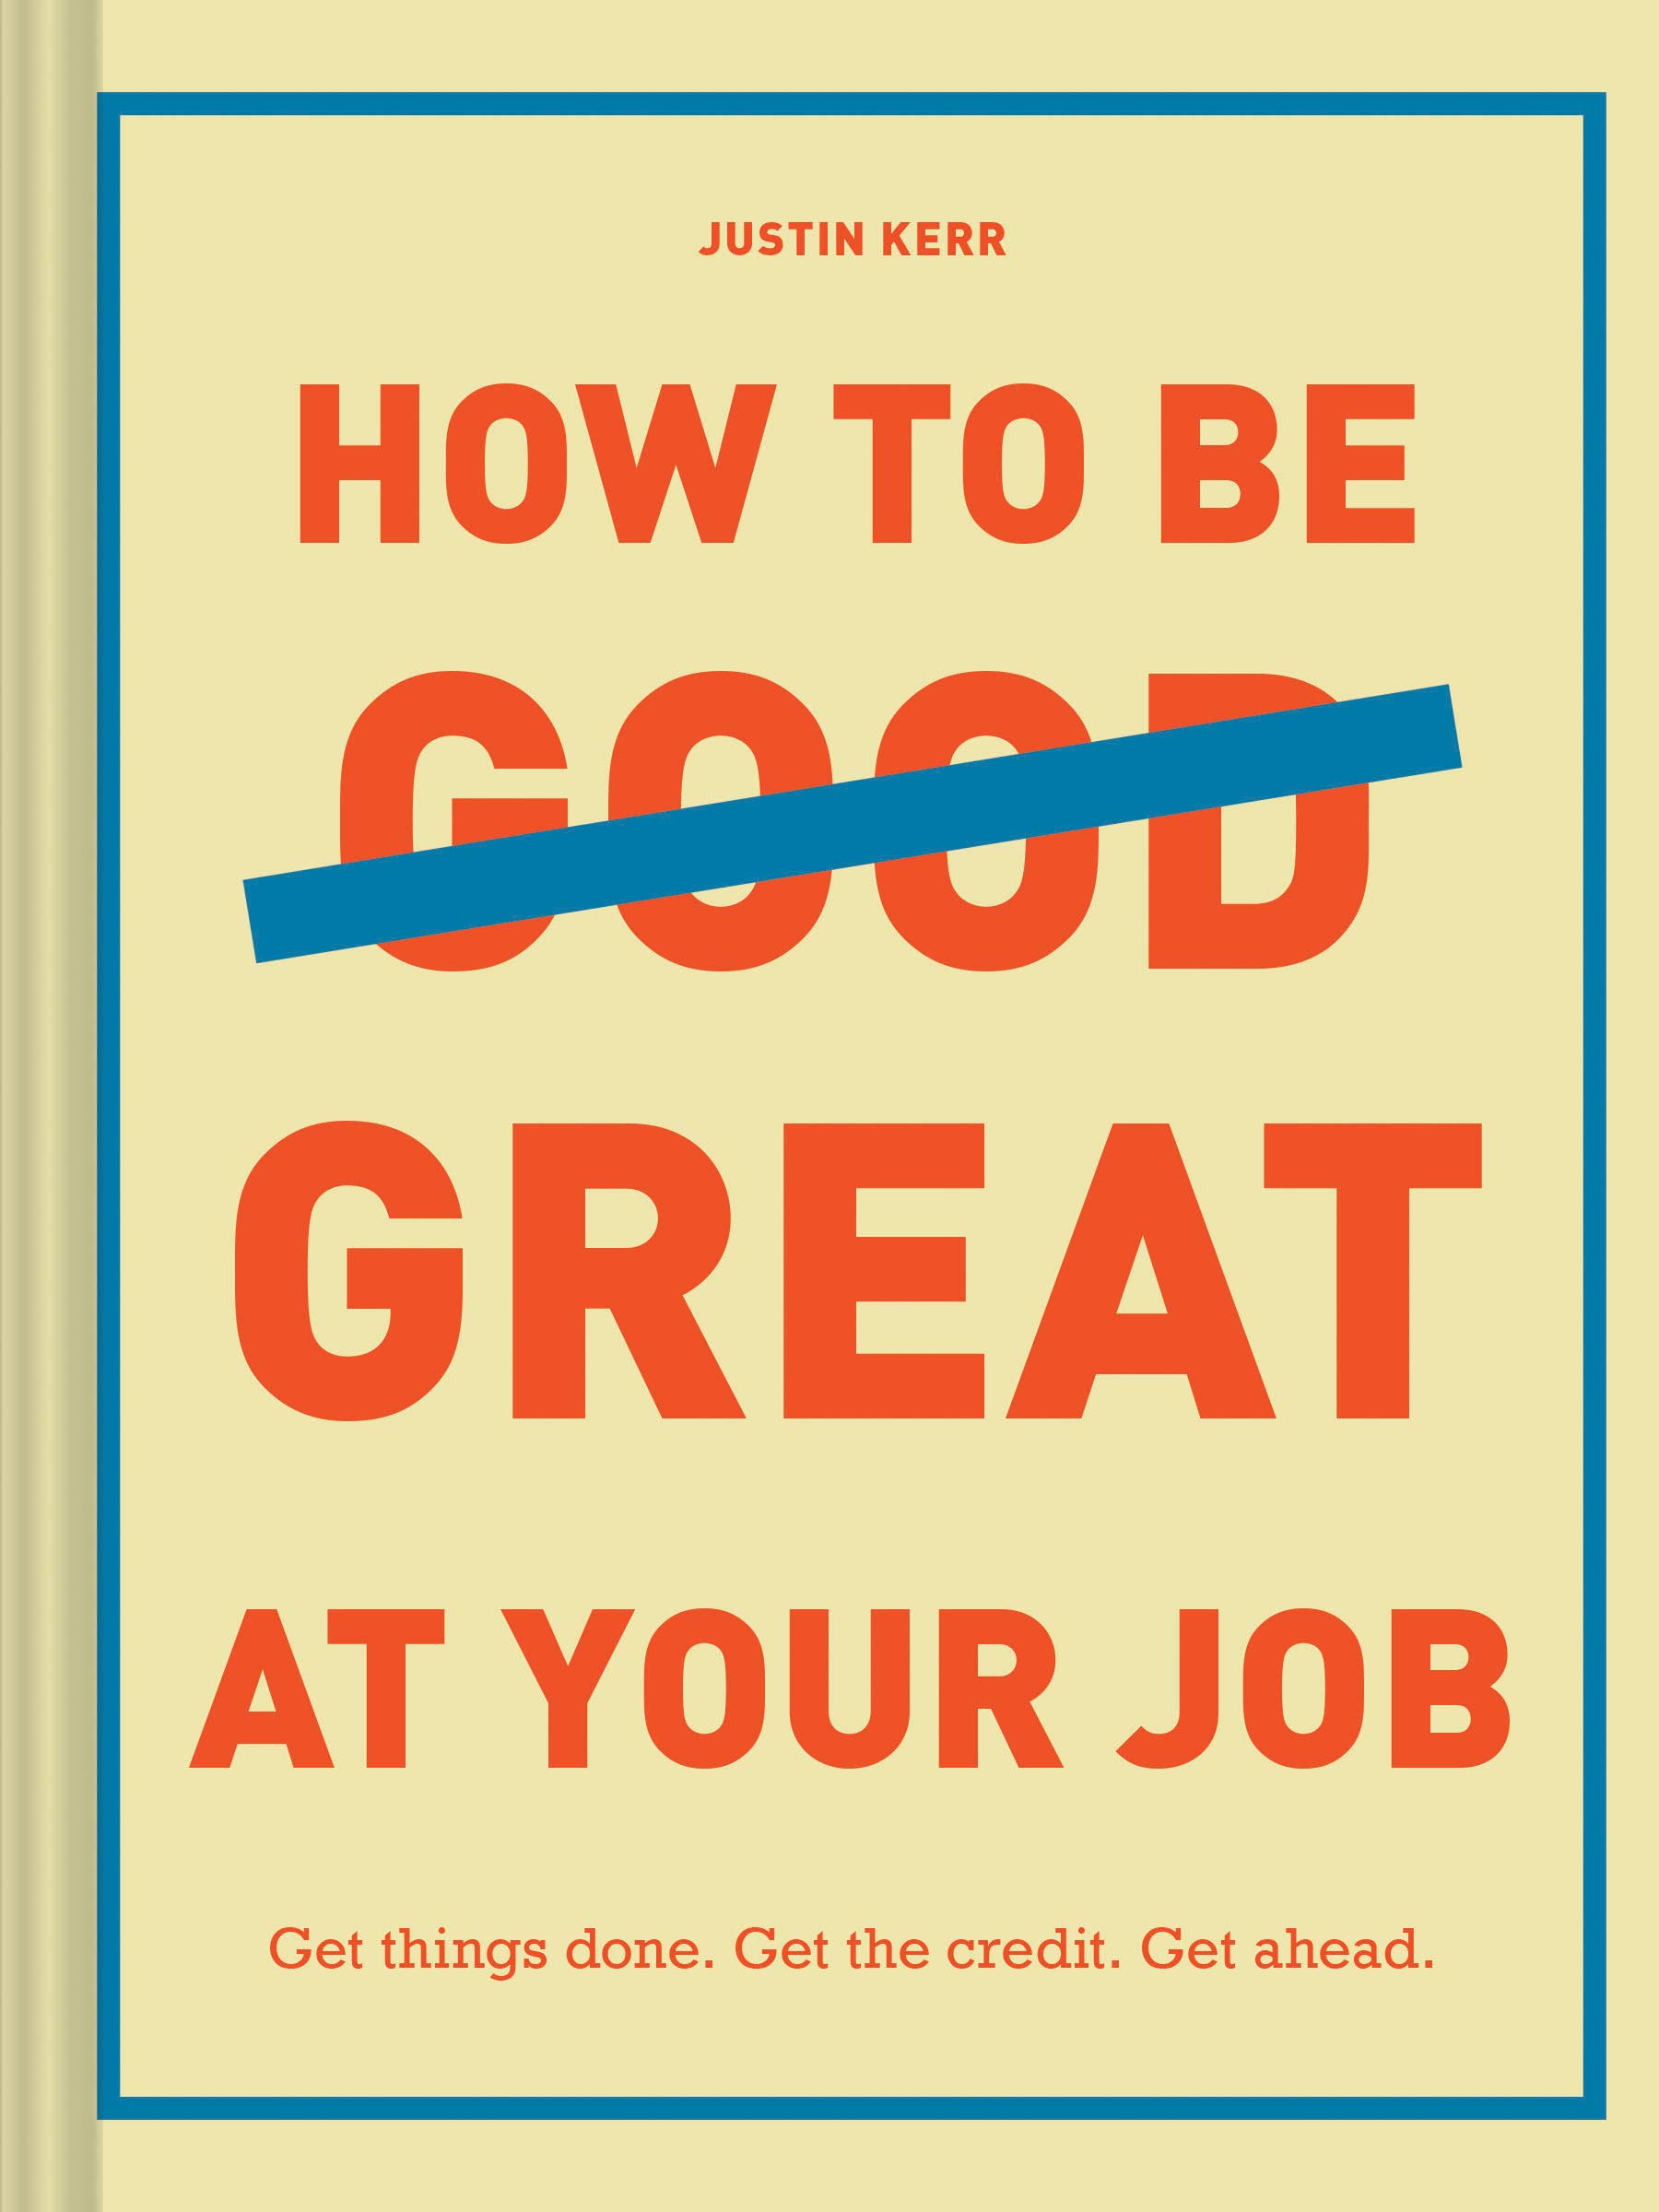 How to Be Great at Your Job | Justin Kerr 